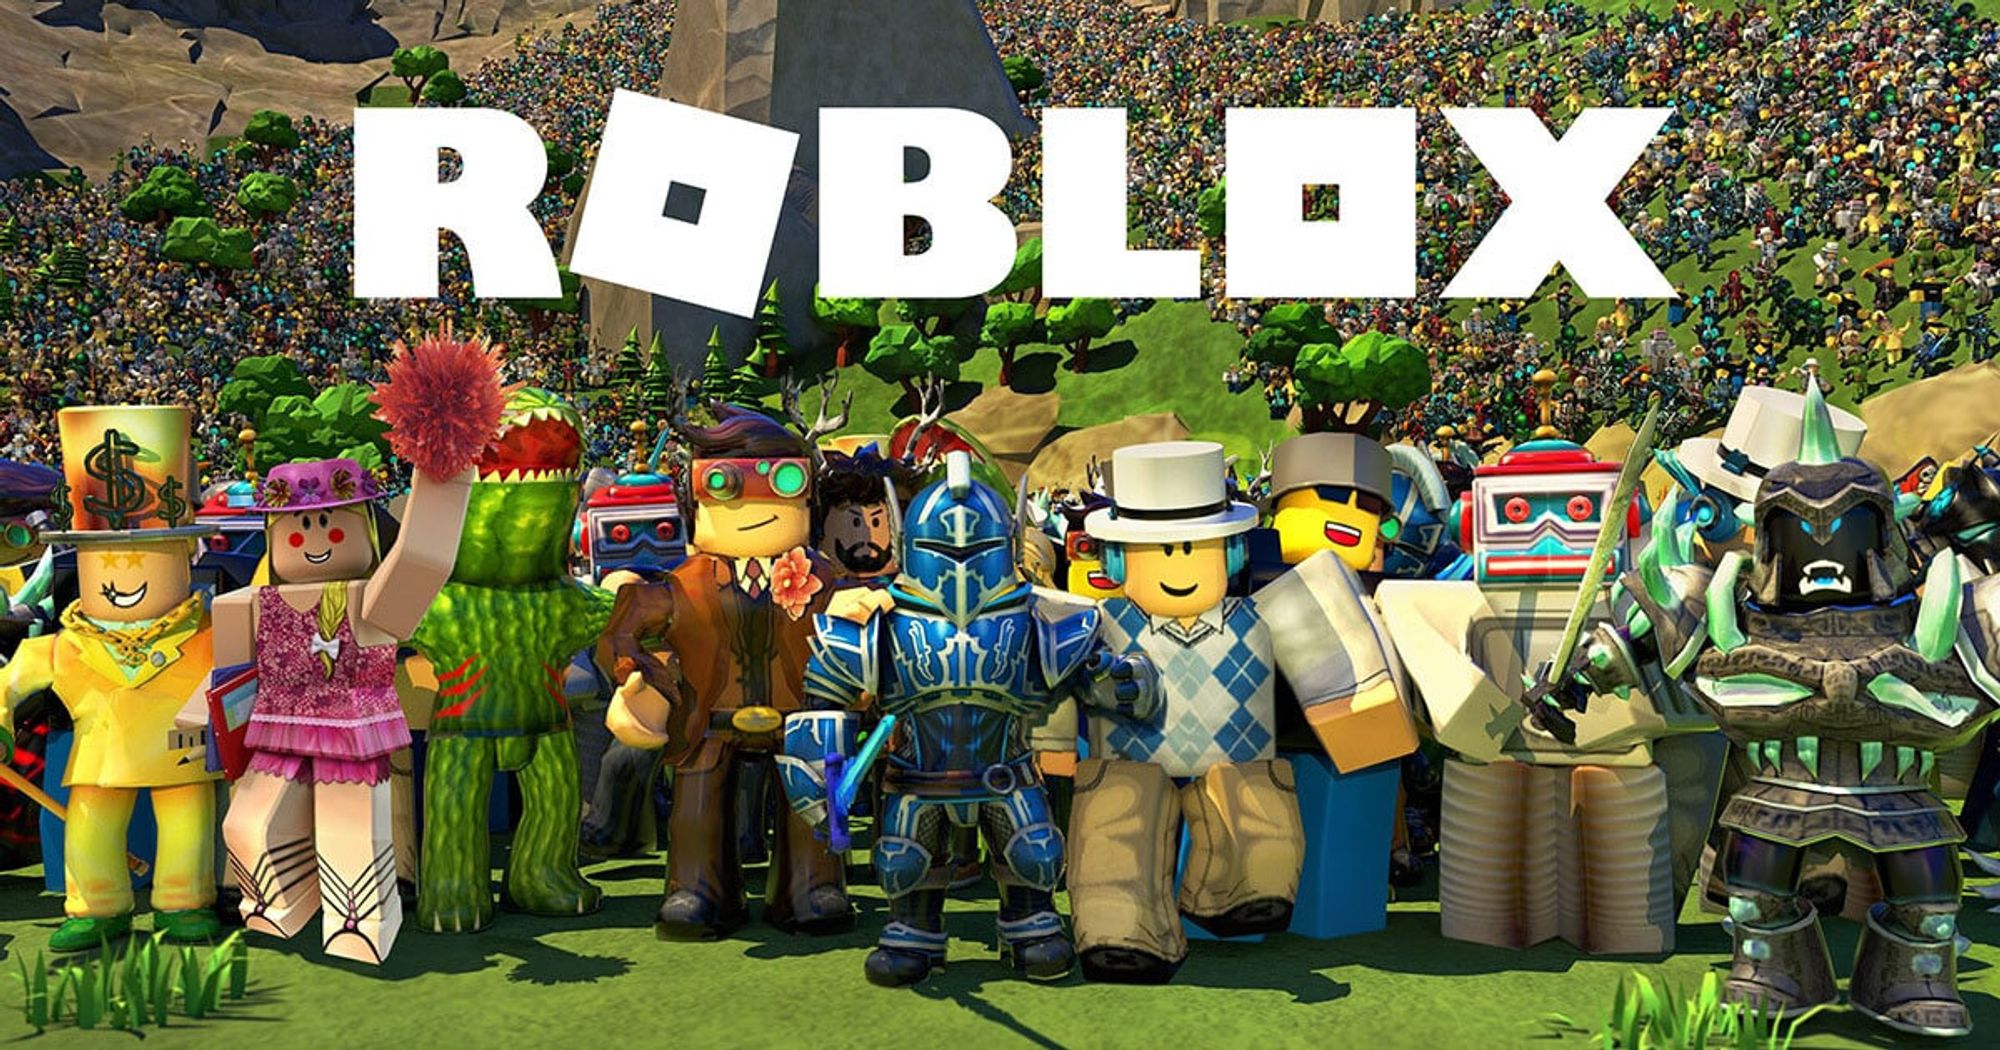 Free Roblox Codes Free Roblox Gift Card Code 2019 No Survey No - roblox gift card generator 2019 100 working